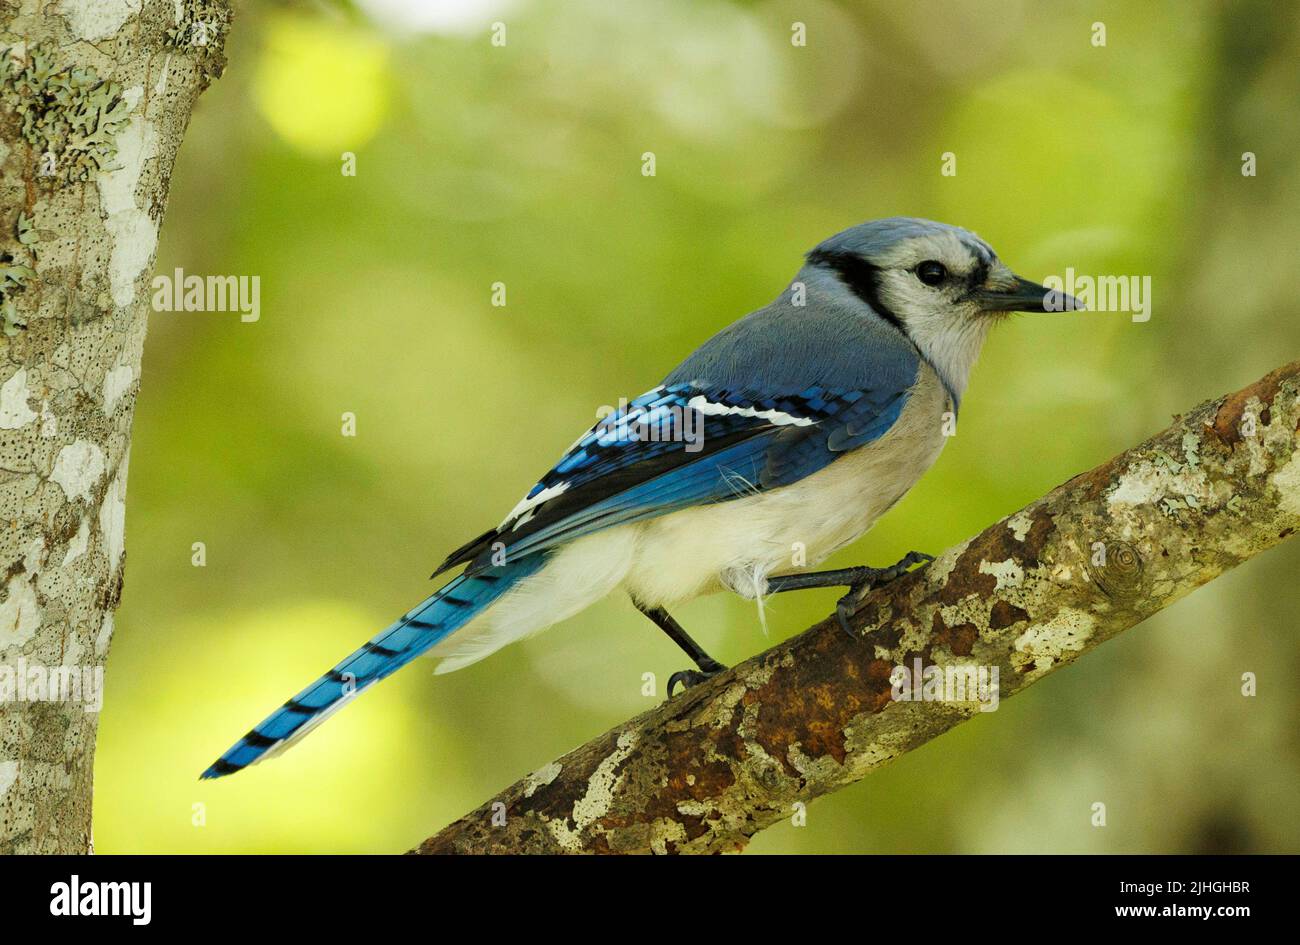 Bluejay close-up perched on a branch Stock Photo